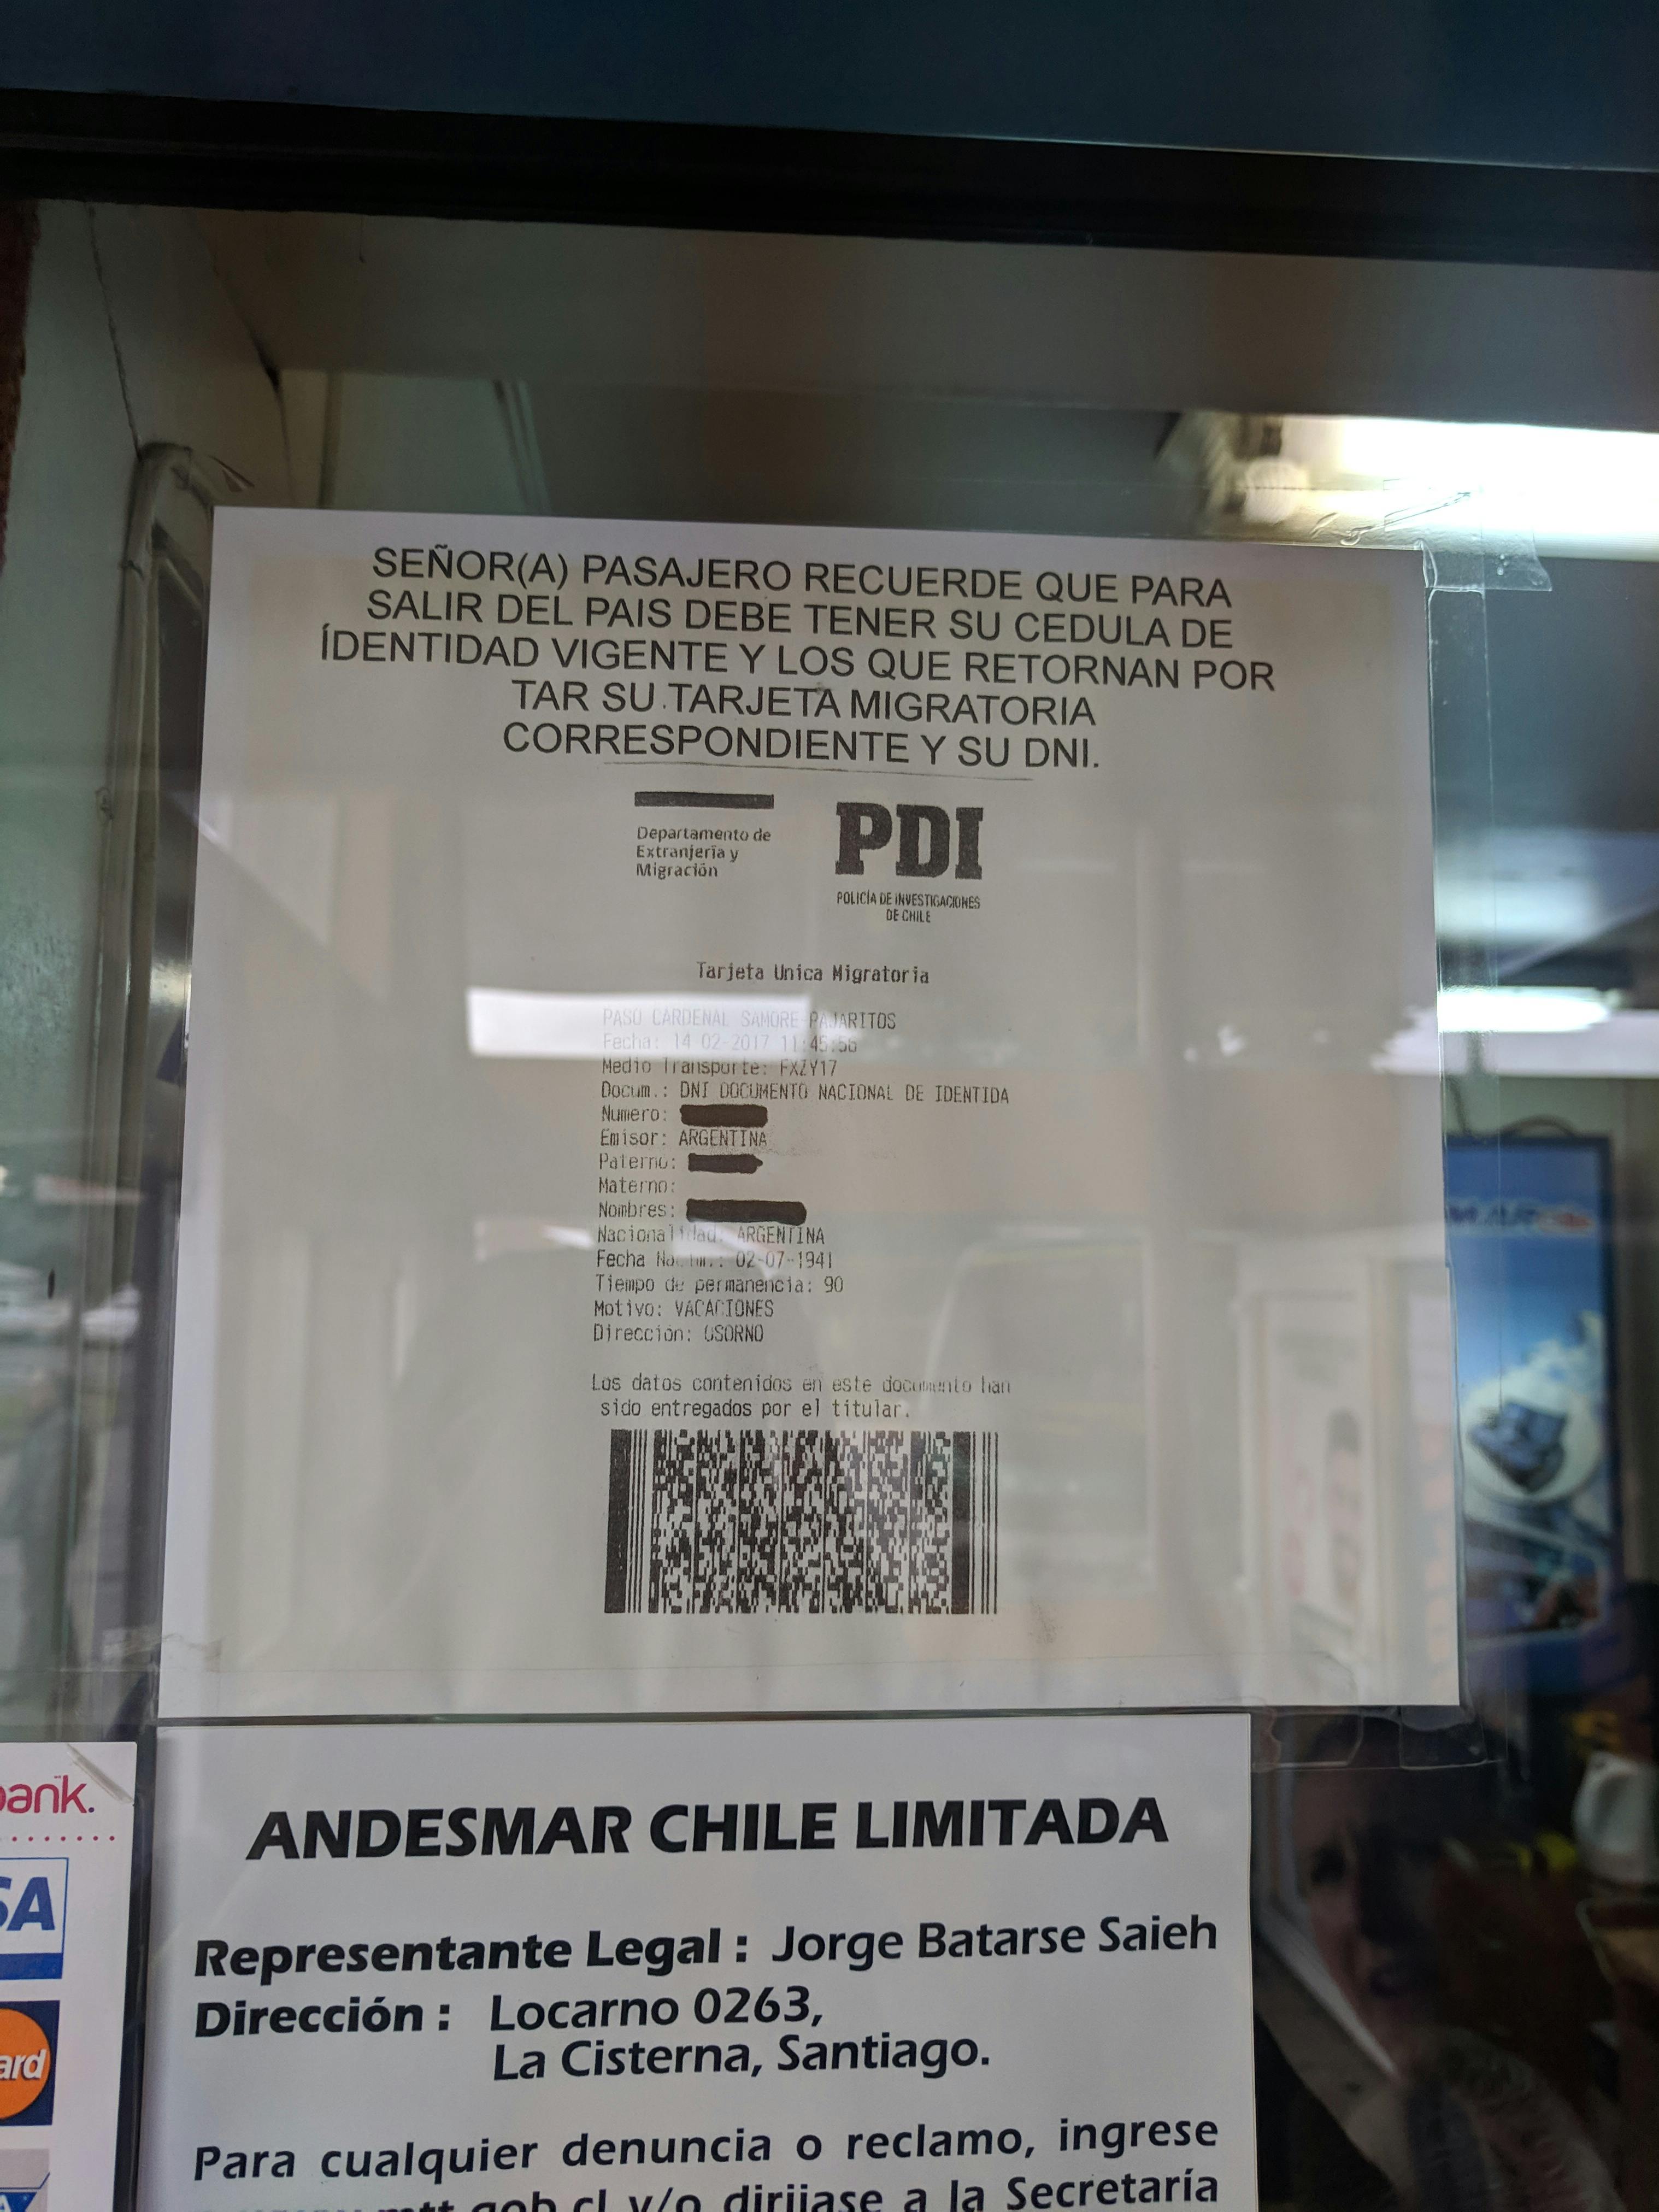 PDI office with example of the paper visa ticket